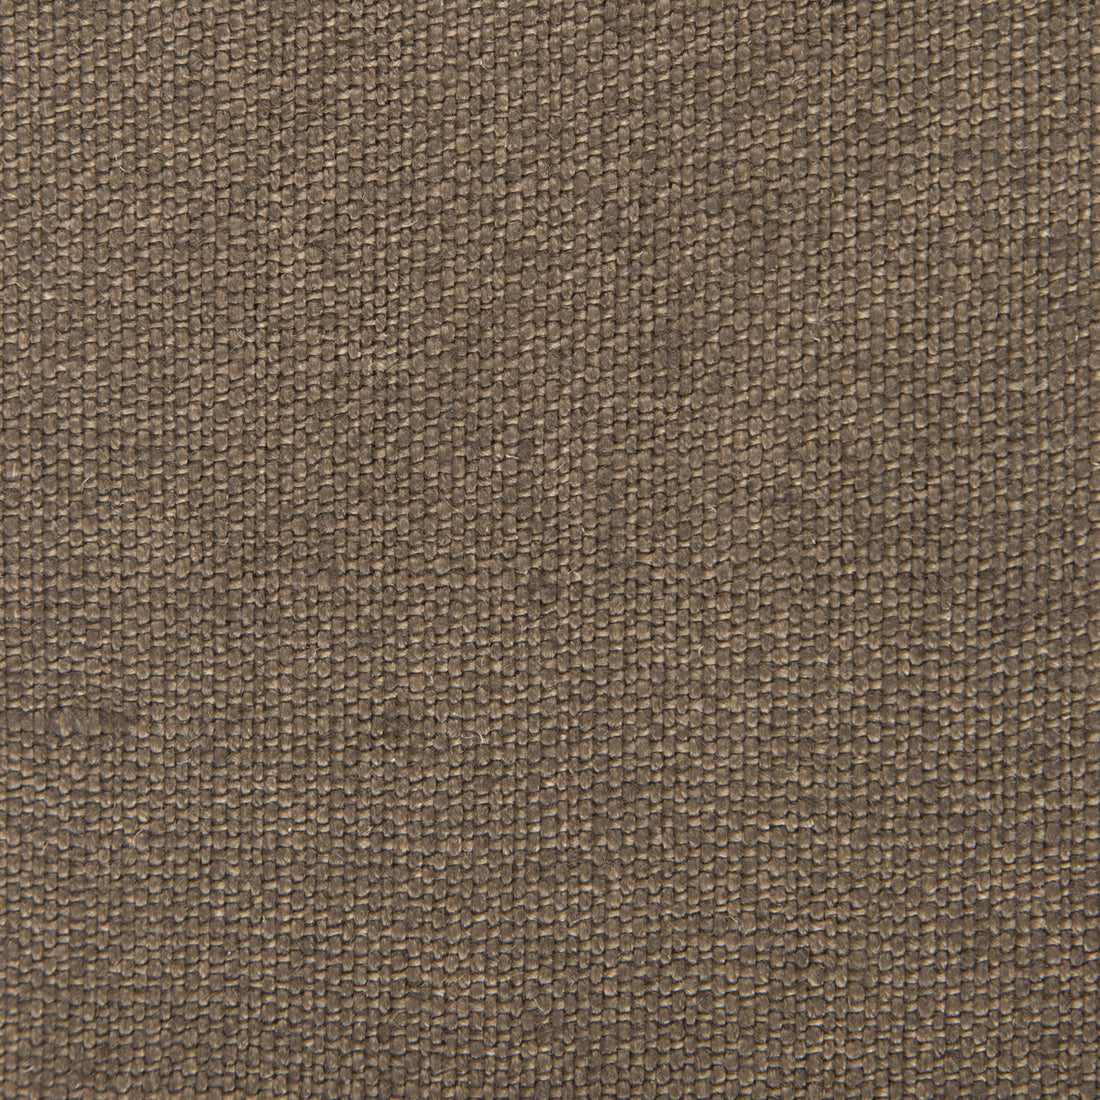 Nicaragua fabric in marron color - pattern GDT5239.028.0 - by Gaston y Daniela in the Basics collection